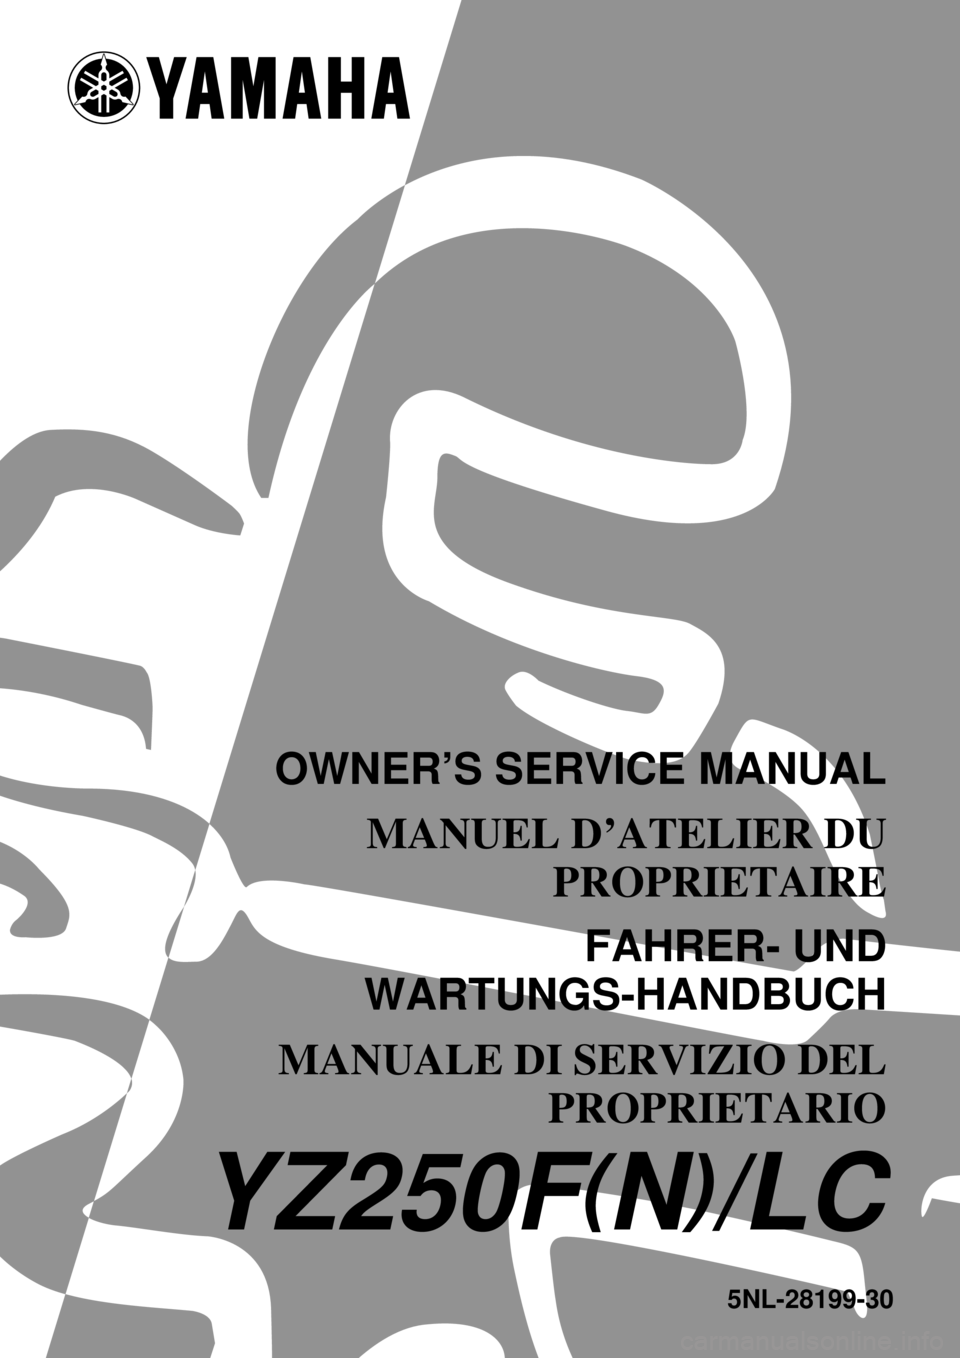 YAMAHA YZ250F 2001  Notices Demploi (in French) 5NL-28199-30
YZ250F(N)/LC
OWNER’S SERVICE MANUAL
MANUEL D’ATELIER DU
PROPRIETAIRE
FAHRER- UND
WARTUNGS-HANDBUCH
MANUALE DI SERVIZIO DEL
PROPRIETARIO 